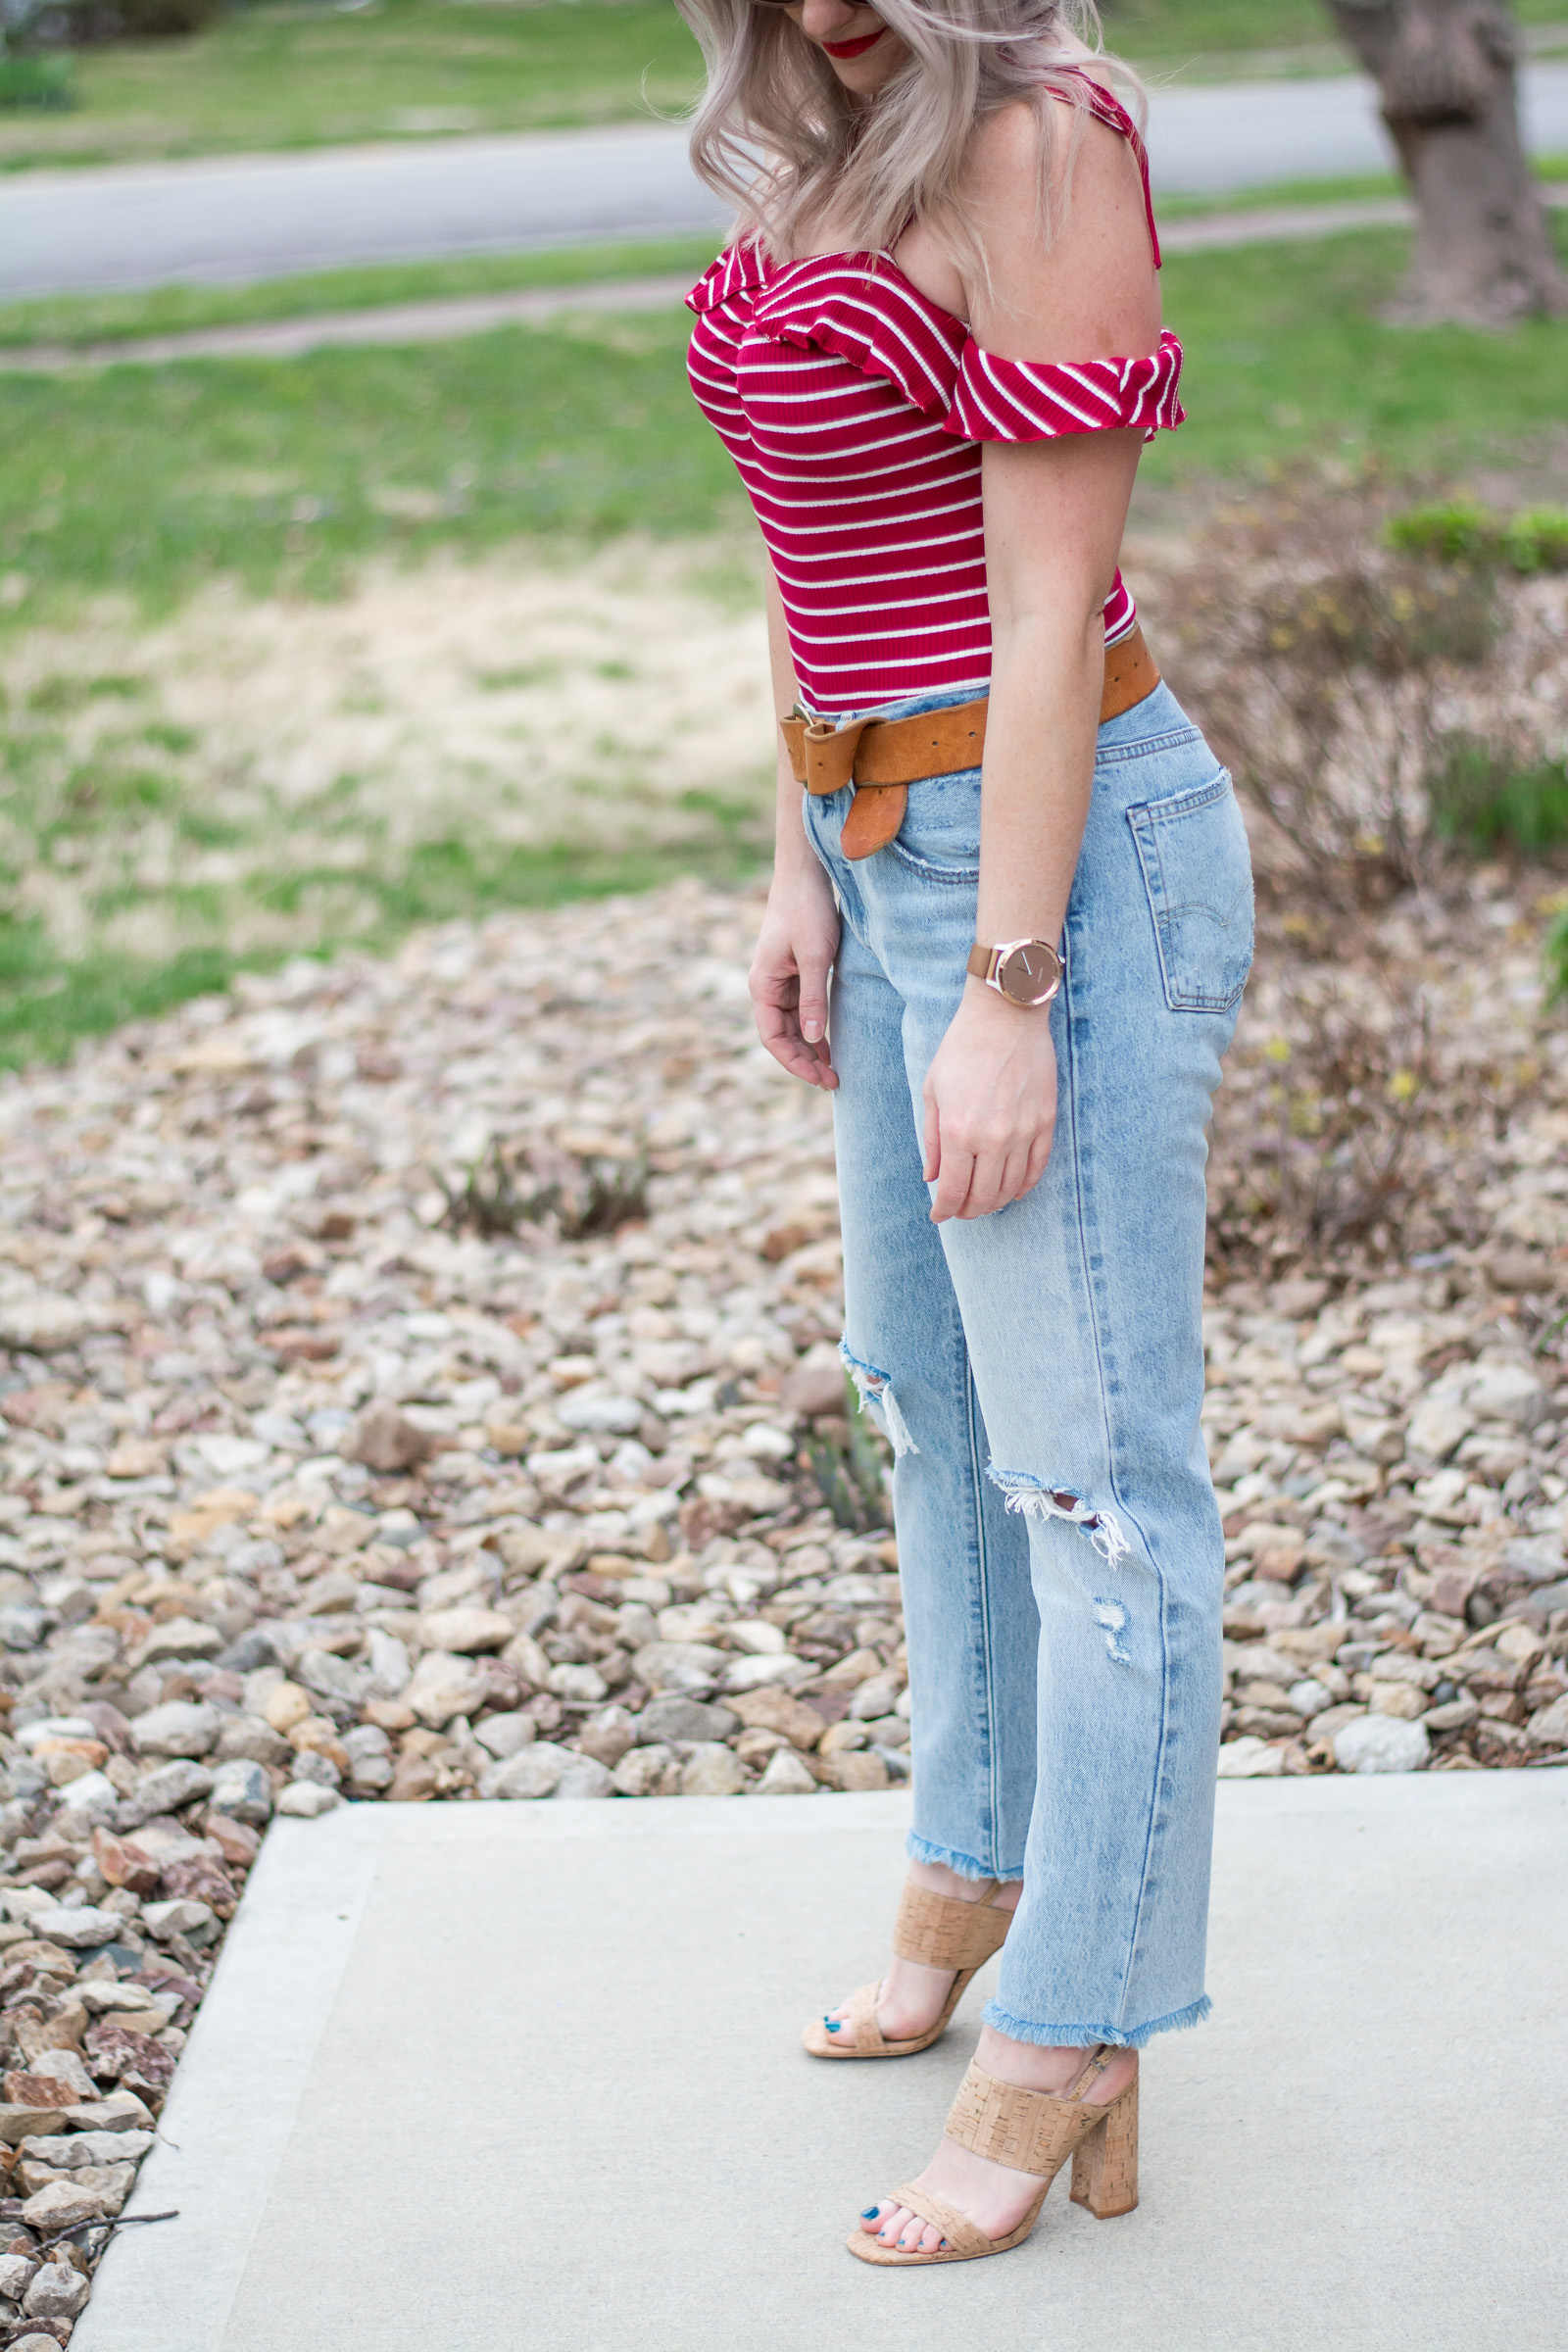 Red Striped Bodysuit + Levi's. | Ashley from LSR